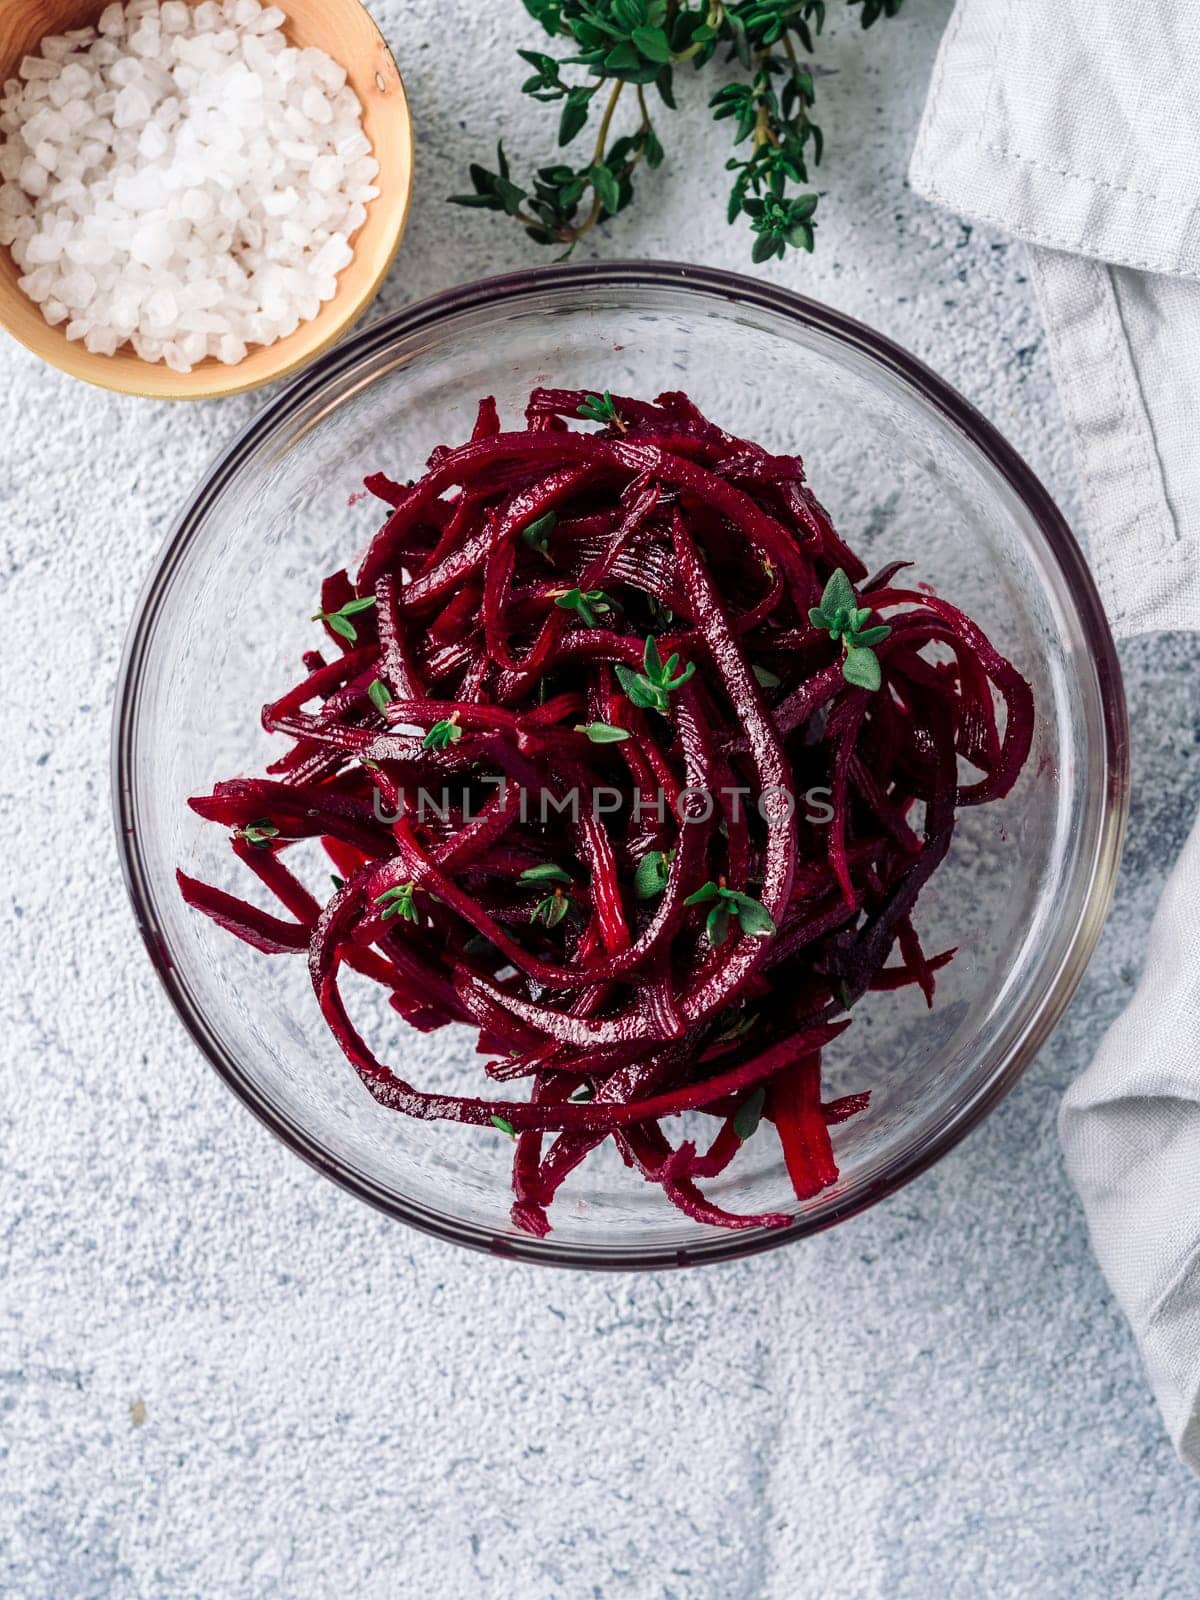 Raw beetroot noodles salad. Vegetable noodles - beet spaghetti on gray background. Copy space for text. Ideas and recipe for Clean eating, raw vegetarian food concept. Top view or flat lay. Vertical.